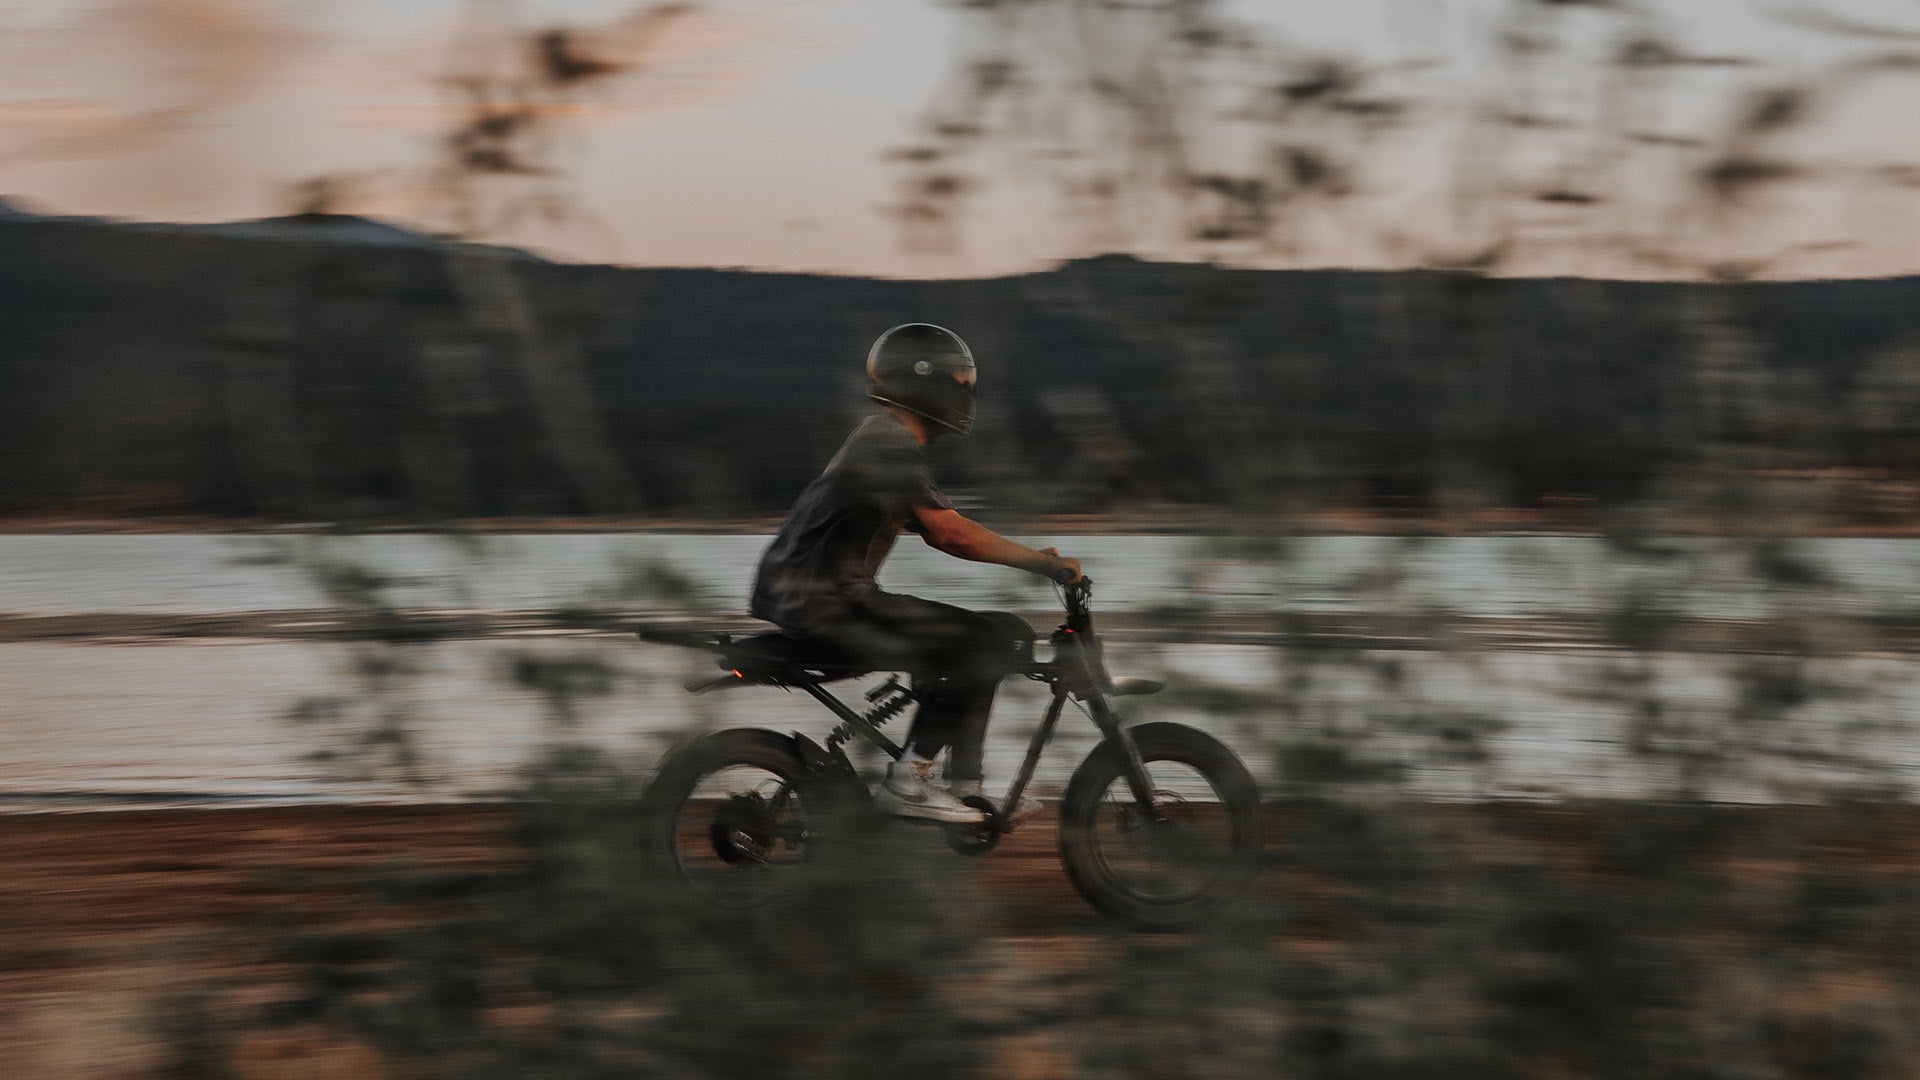 Rider Racing along body of water on Super73 ebike